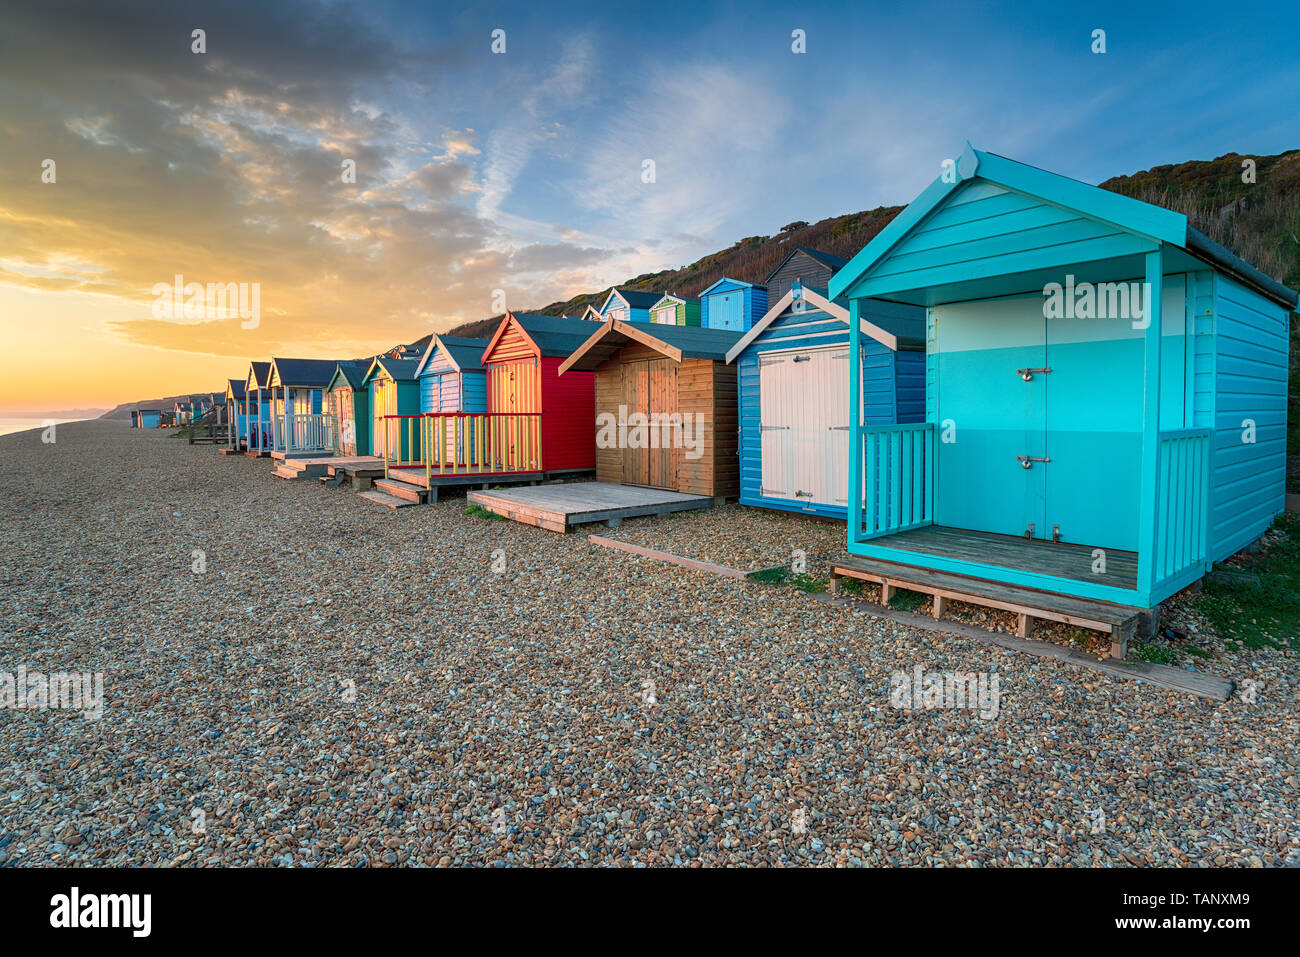 Stunning sunset over a row of brightly coloured beach huts at Milford on Sea on the Hampshire coast Stock Photo